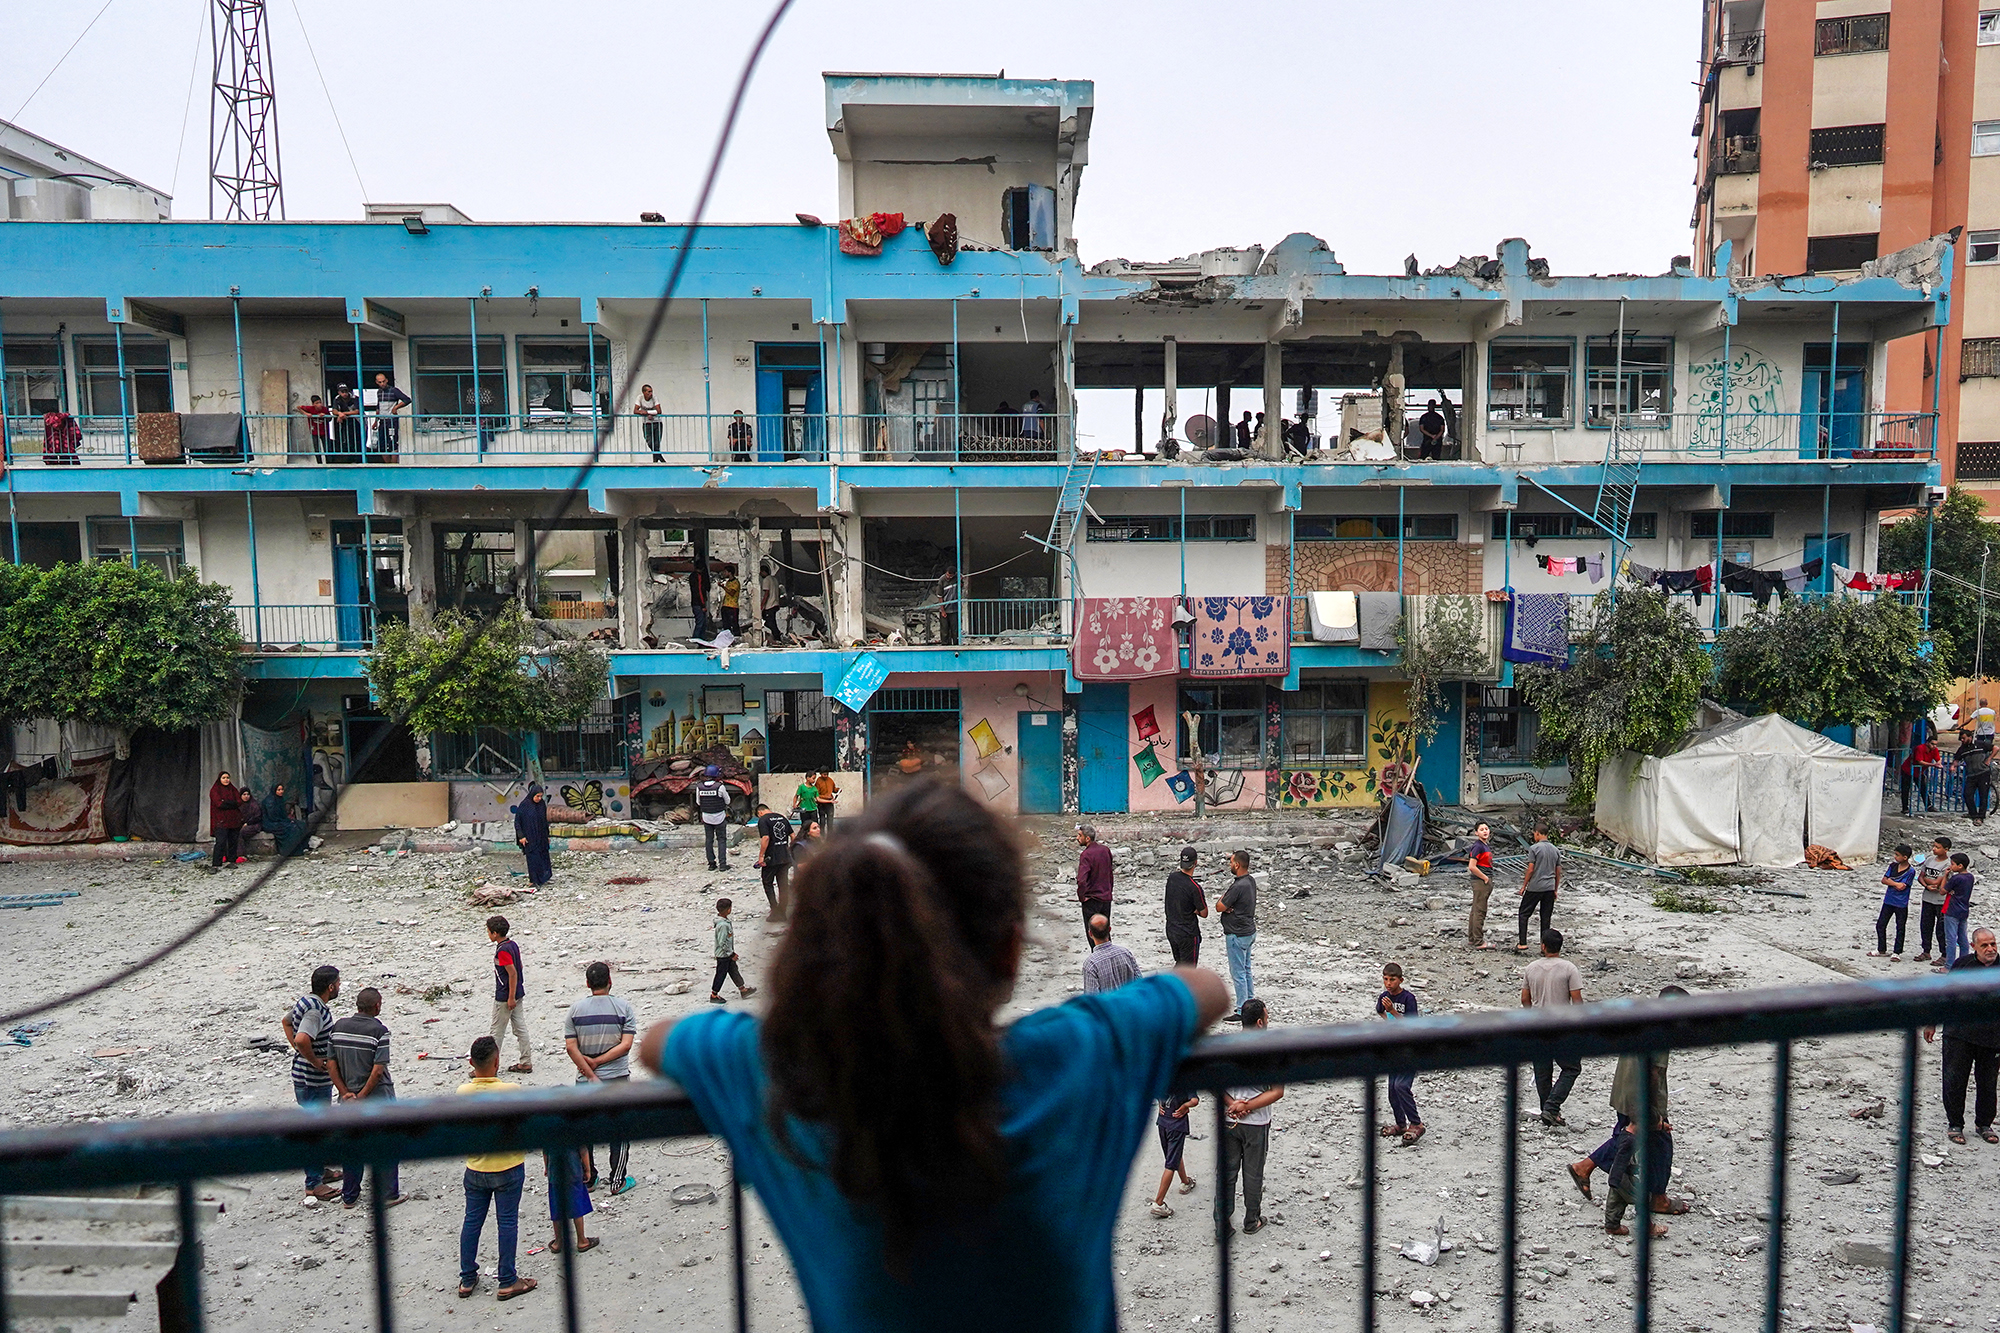 A Palestinian girl watches over a UN-school housing displaced people that was hit by Israeli bombardment in Nuseirat, Gaza, on June 6.